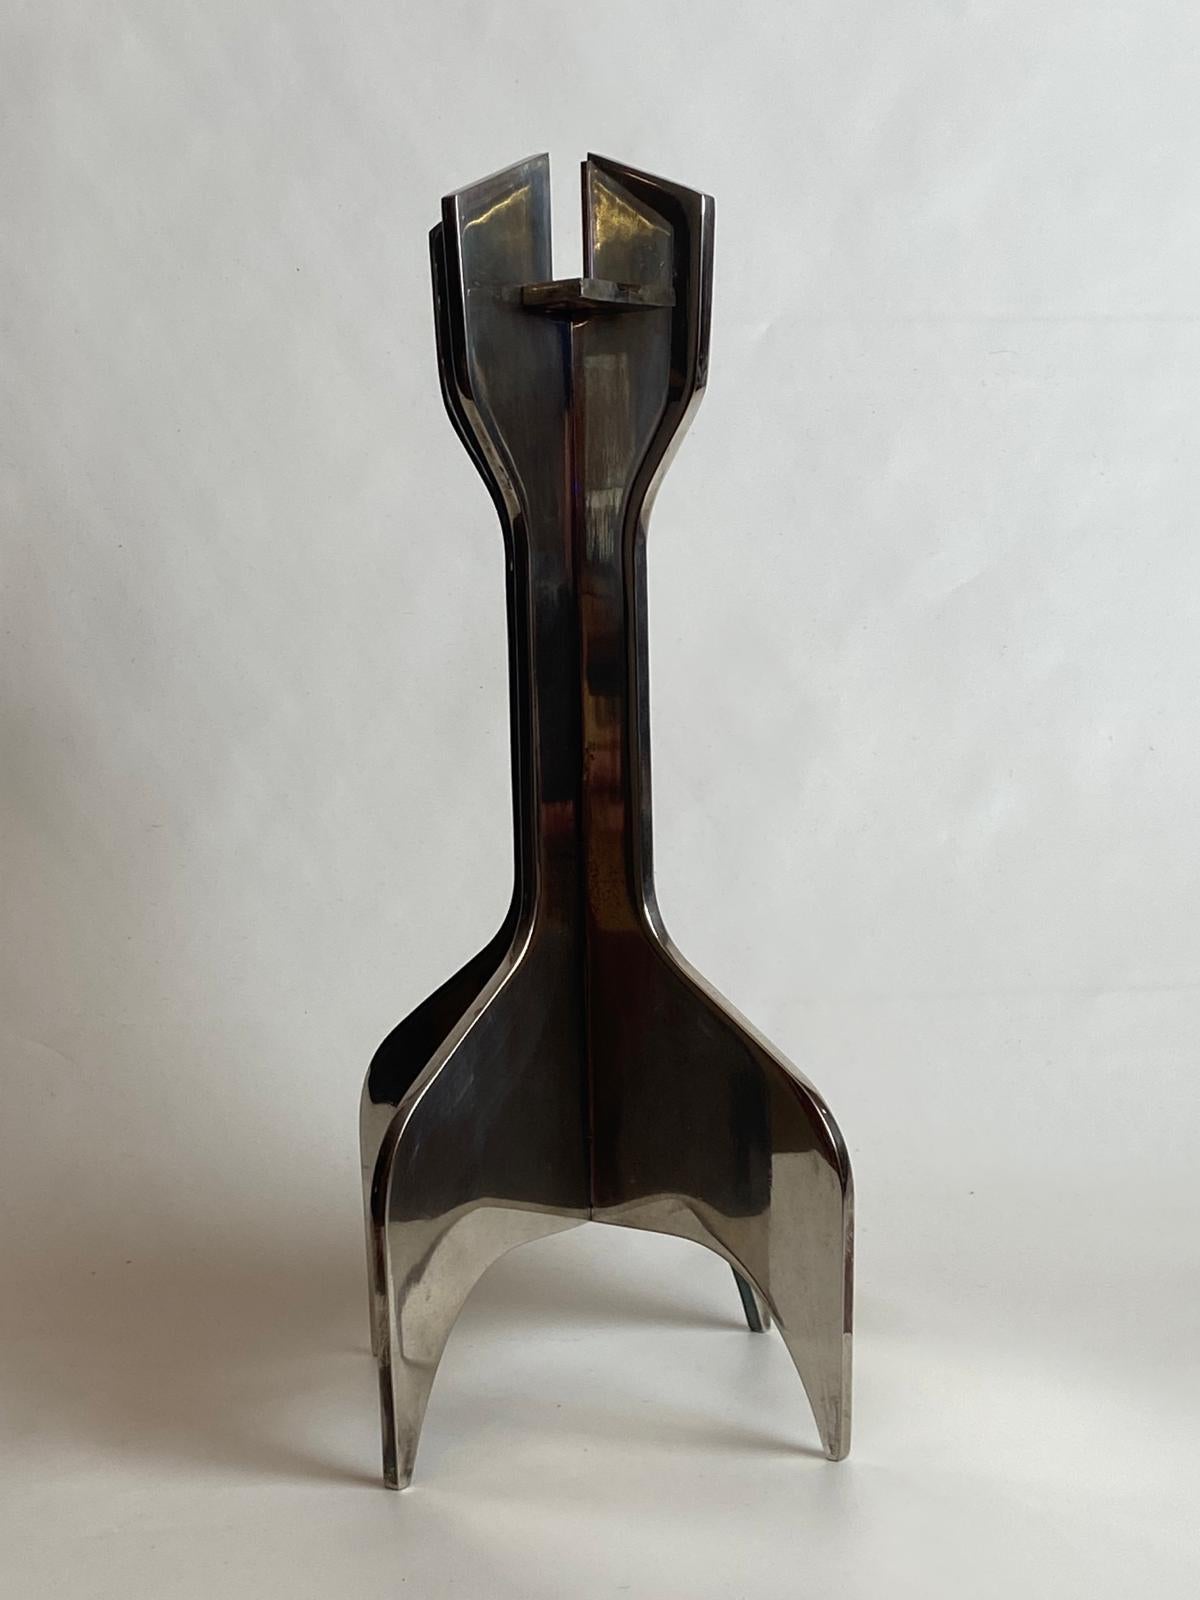 Candle holder designed by Marcel Breuer and manufactured by Gavina, circa 1963
Elegant and timeless candle holder, 1960s sculptural candlestick by Marcel Breuer for Gavina
This candlestick gives a touch of iconic design and sophistication to your